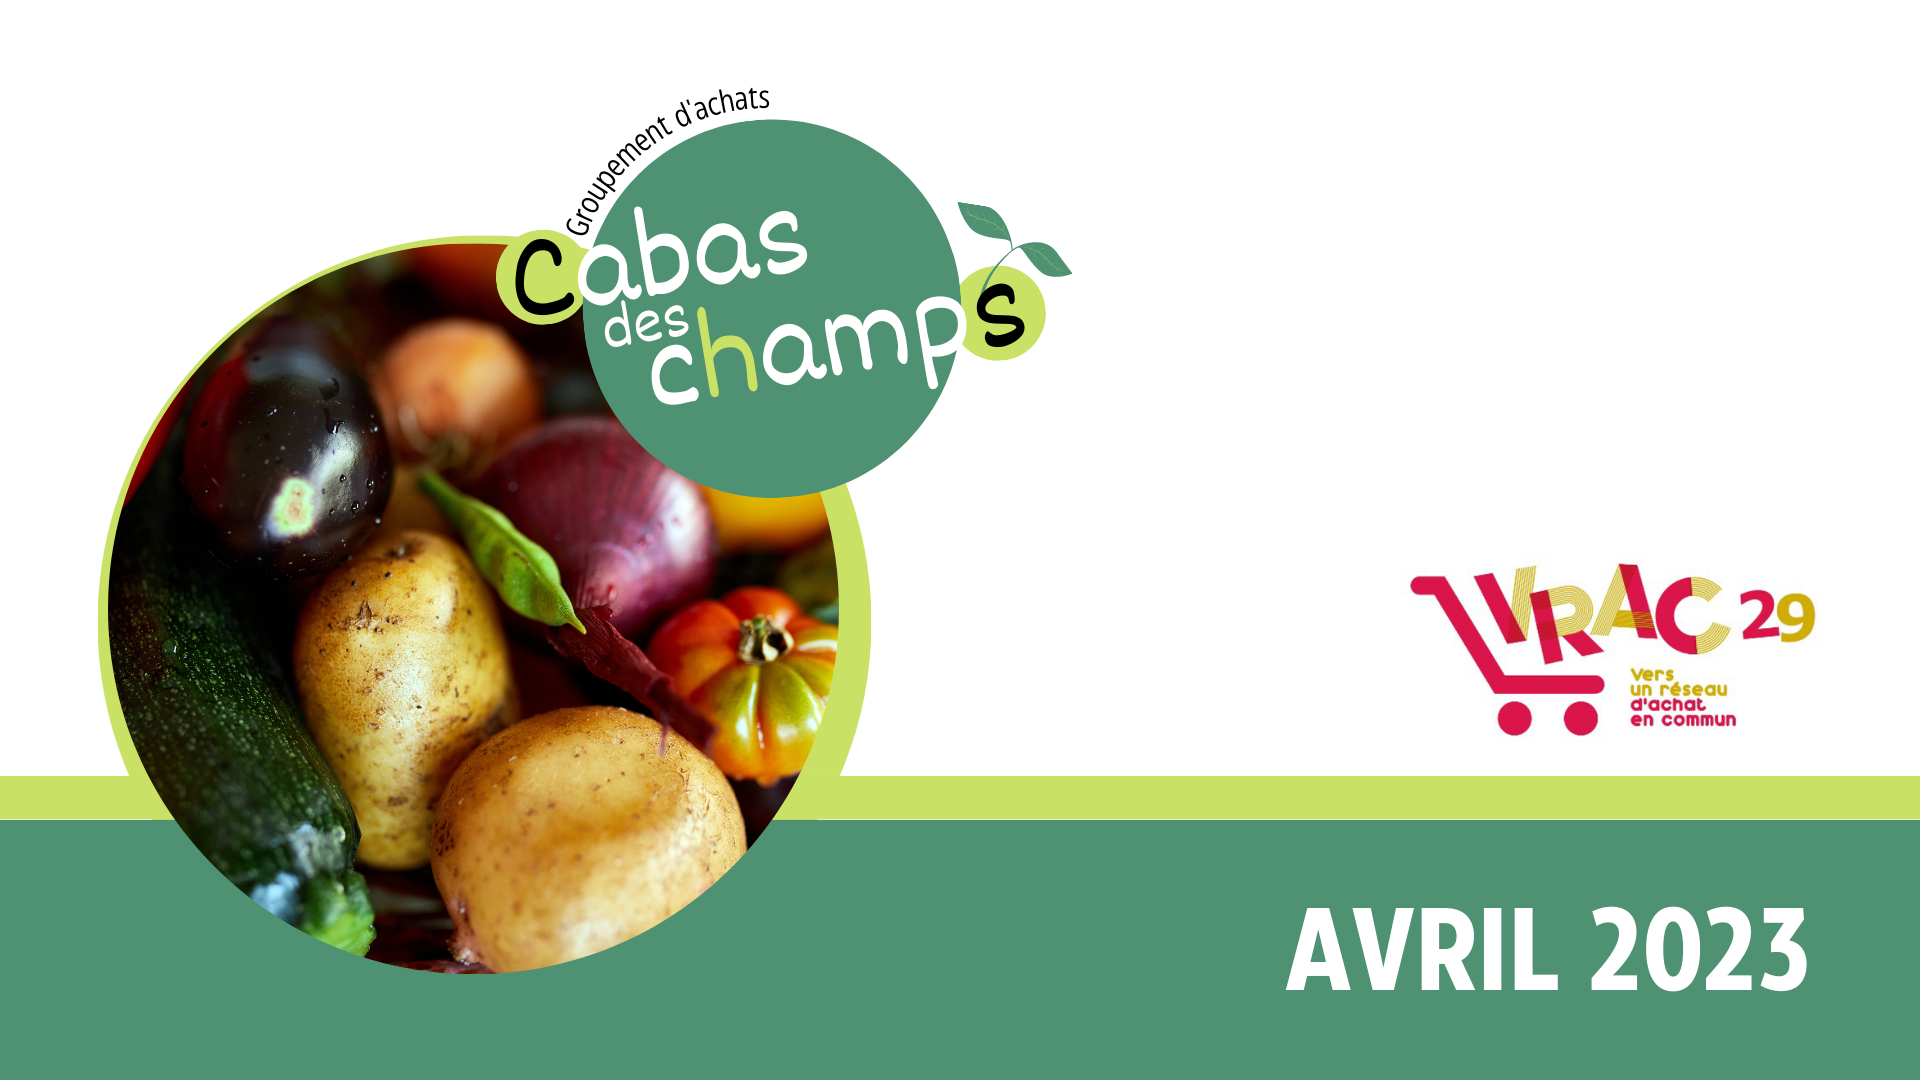 You are currently viewing Cabas des champs et Vrac 29 – Avril 2023